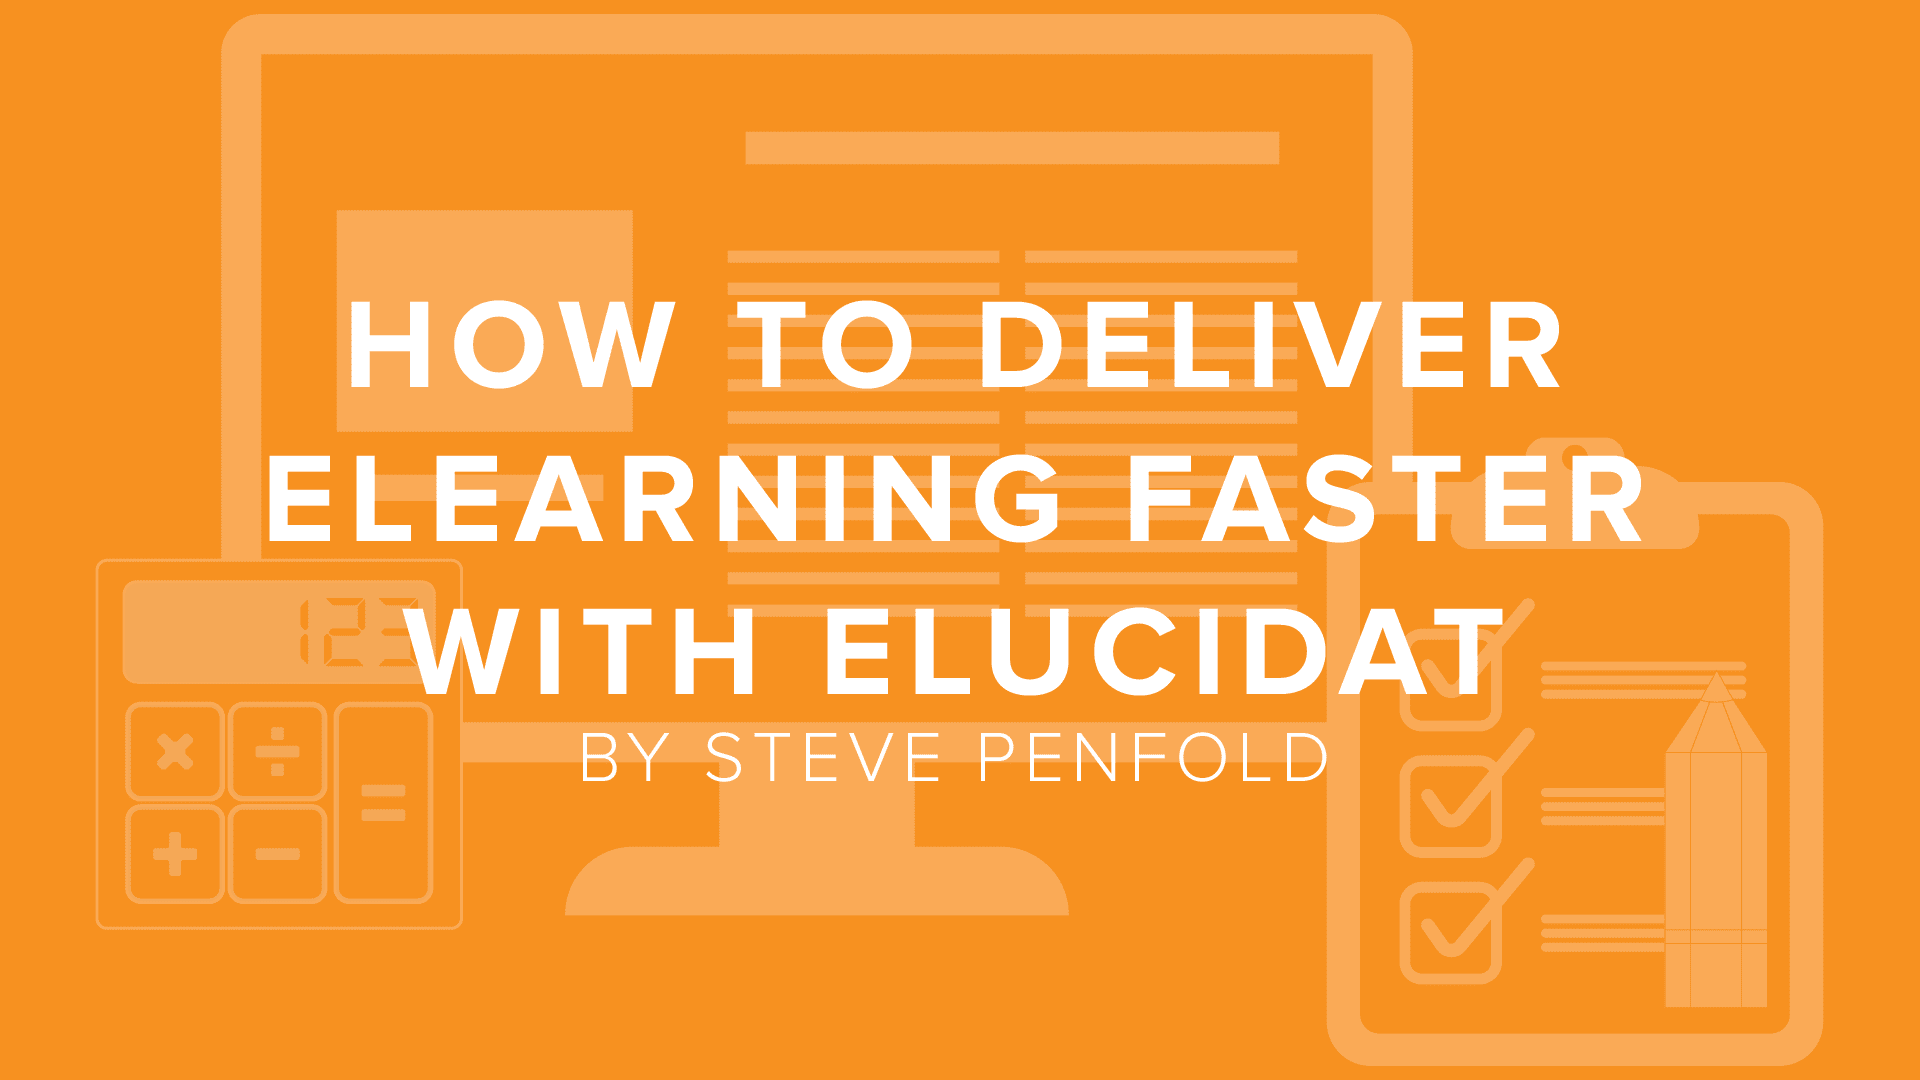 DigitalChalk: How to Deliver eLearning Faster with Elucidat by Steve Penfold